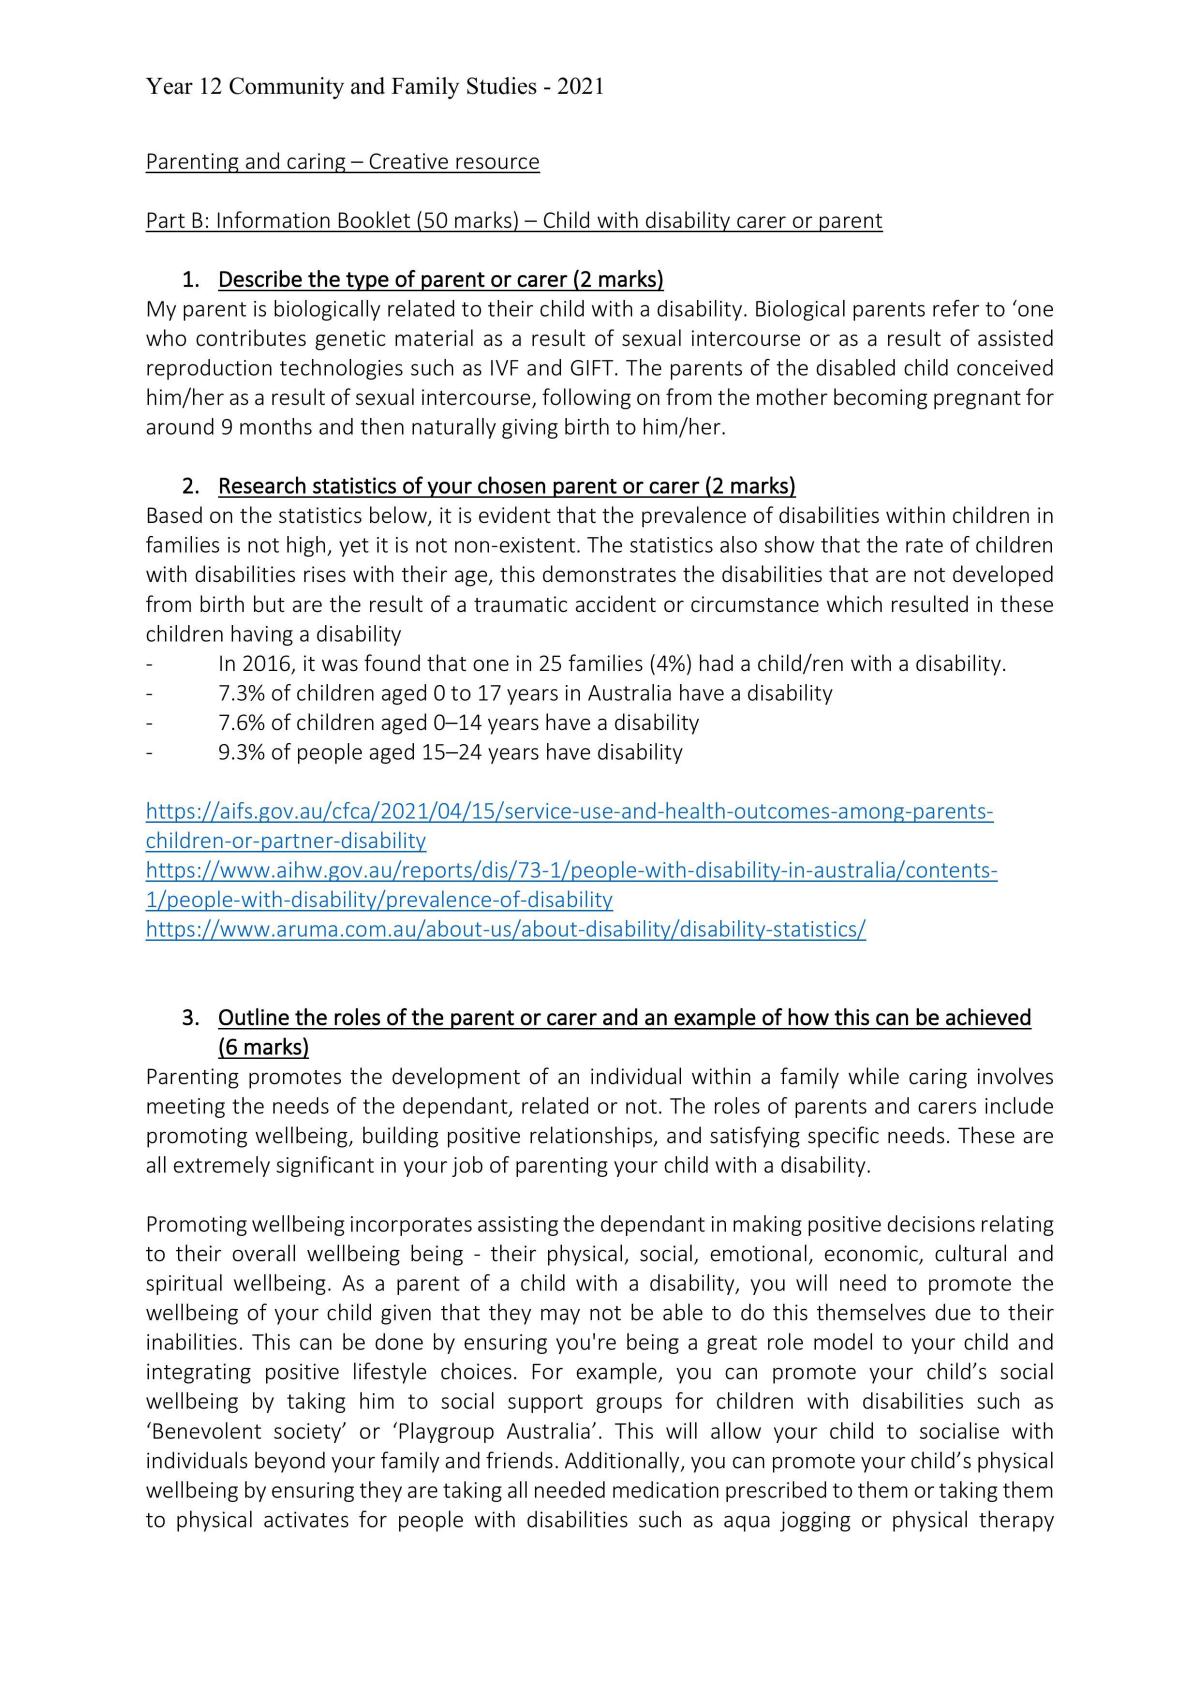 Community and Family Studies Parenting and Caring Assessment - Page 1